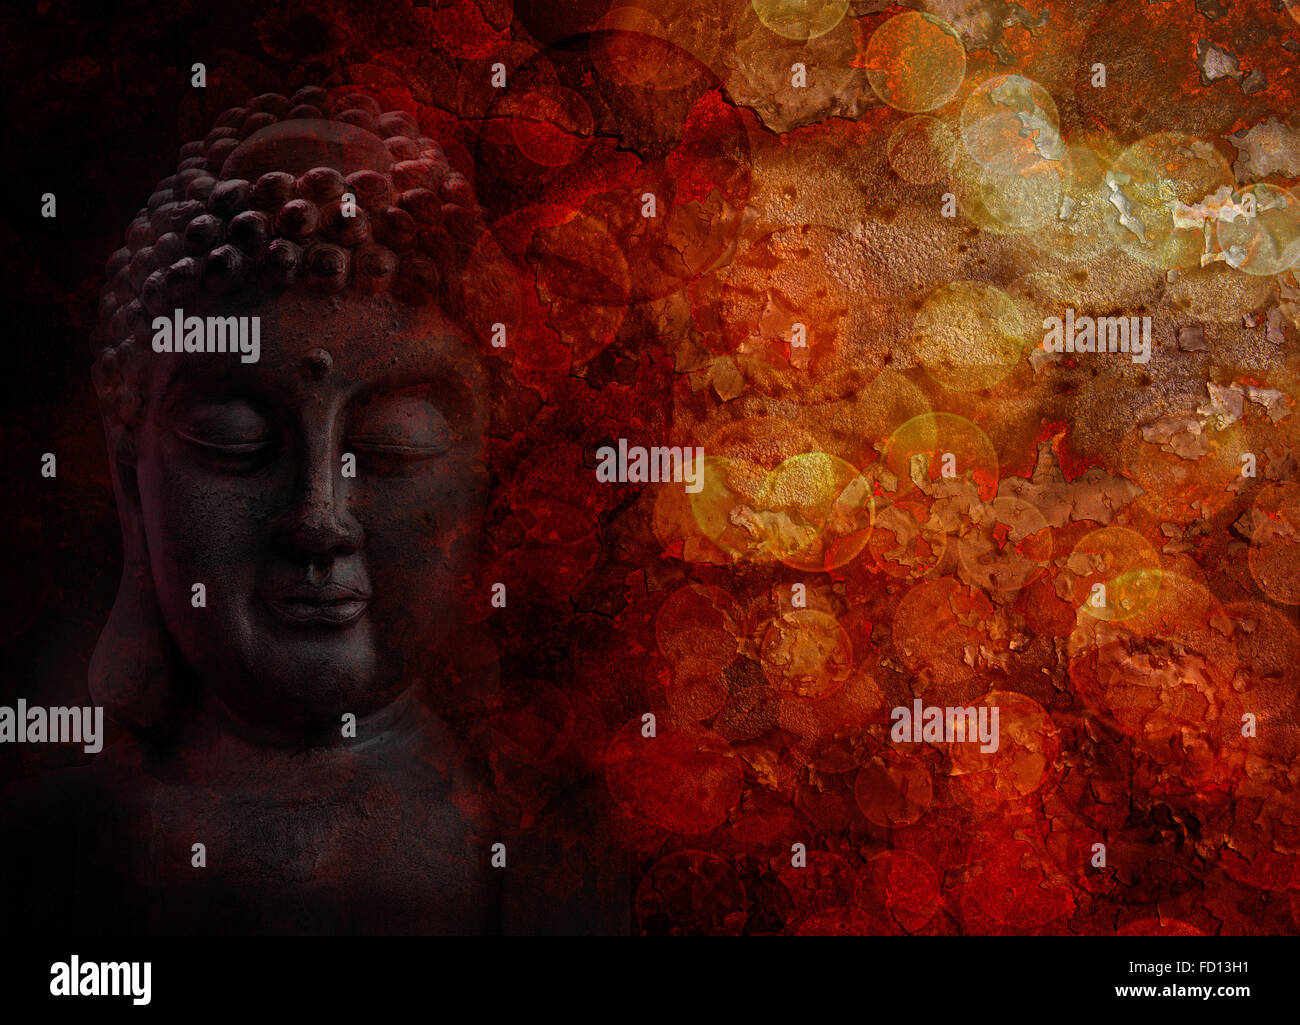 Bronze Zen Buddha Statue Meditating Face Front Portrait with Blurred Textured Red Background Stock Photo